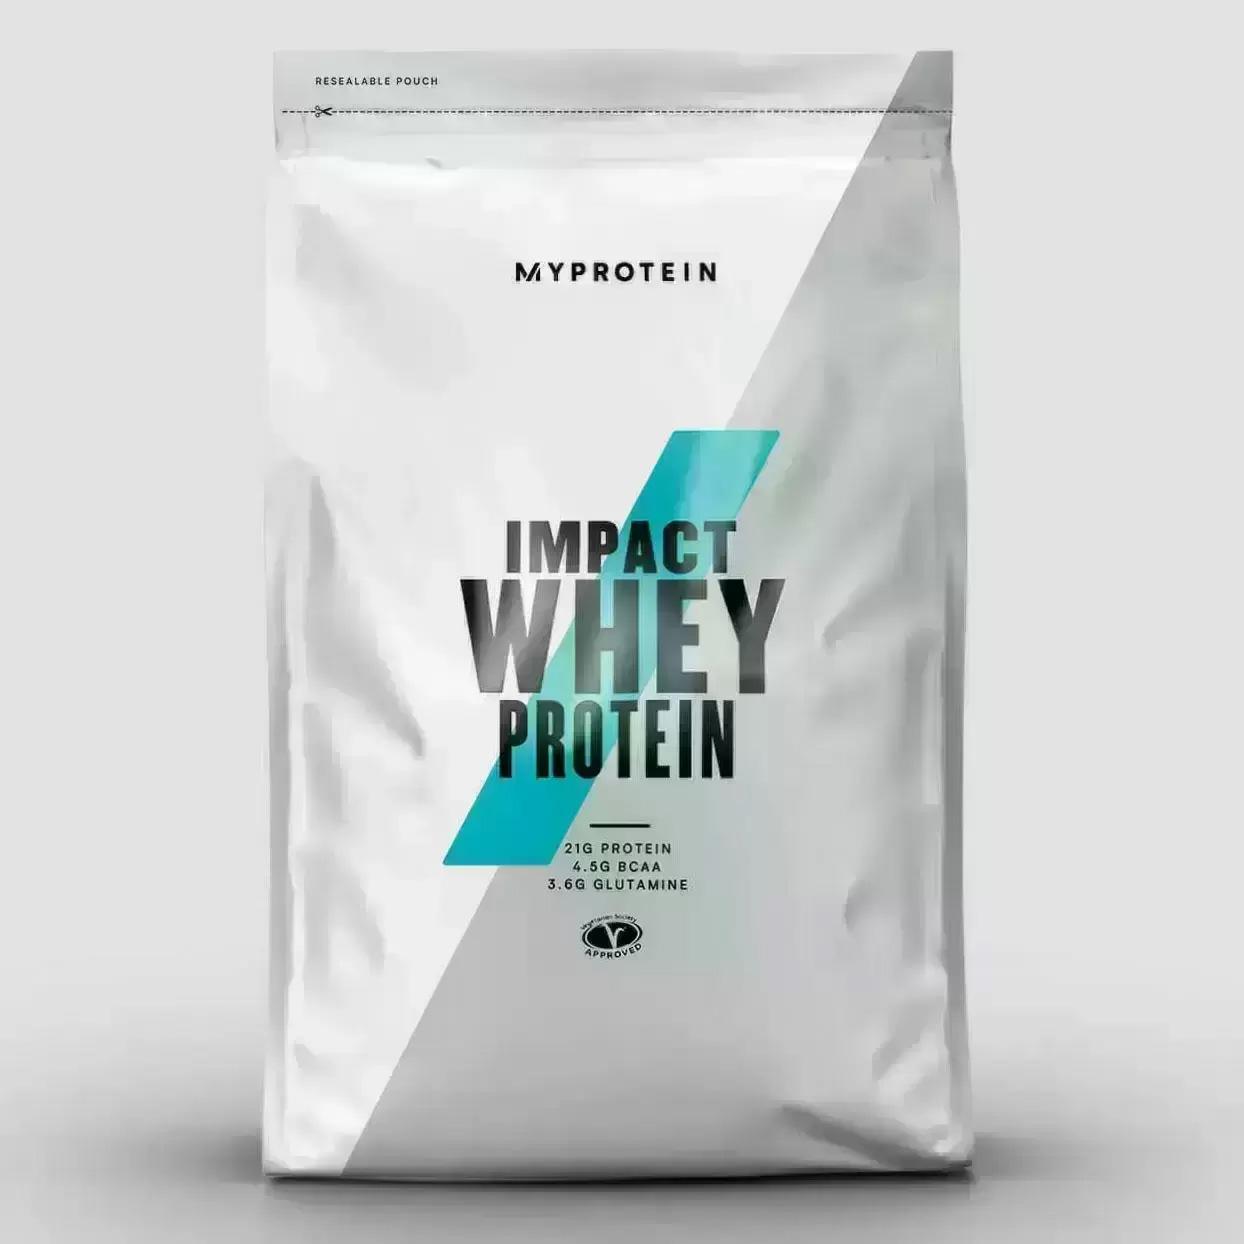 5.5lbs MyProtein Impact Whey Isolate Protein for $25 Shipped